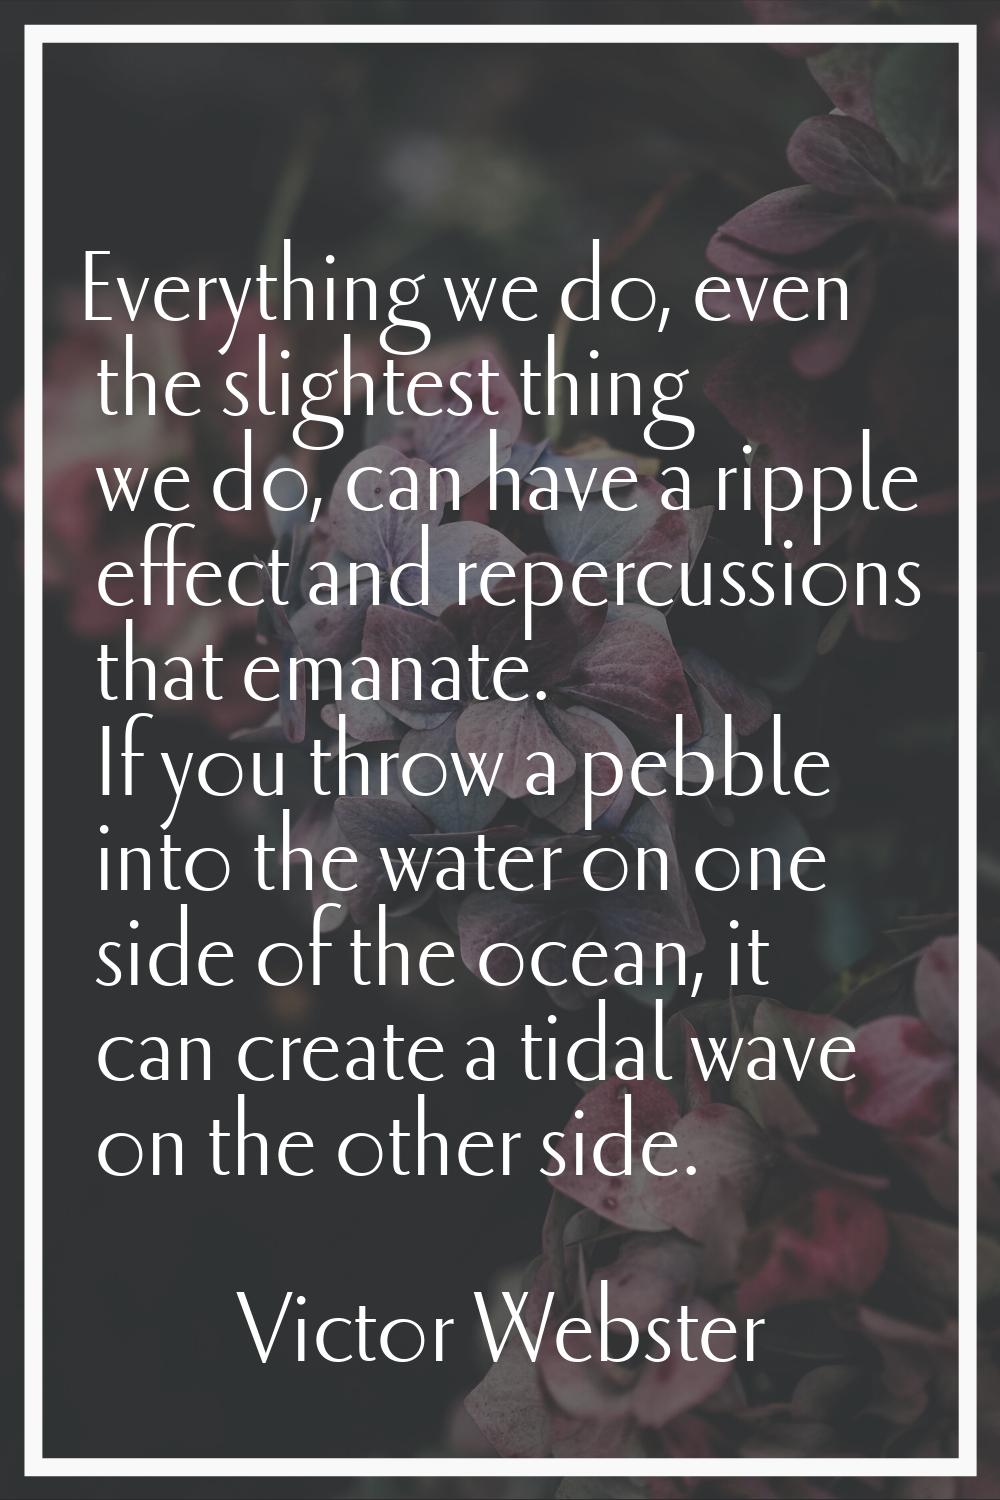 Everything we do, even the slightest thing we do, can have a ripple effect and repercussions that e